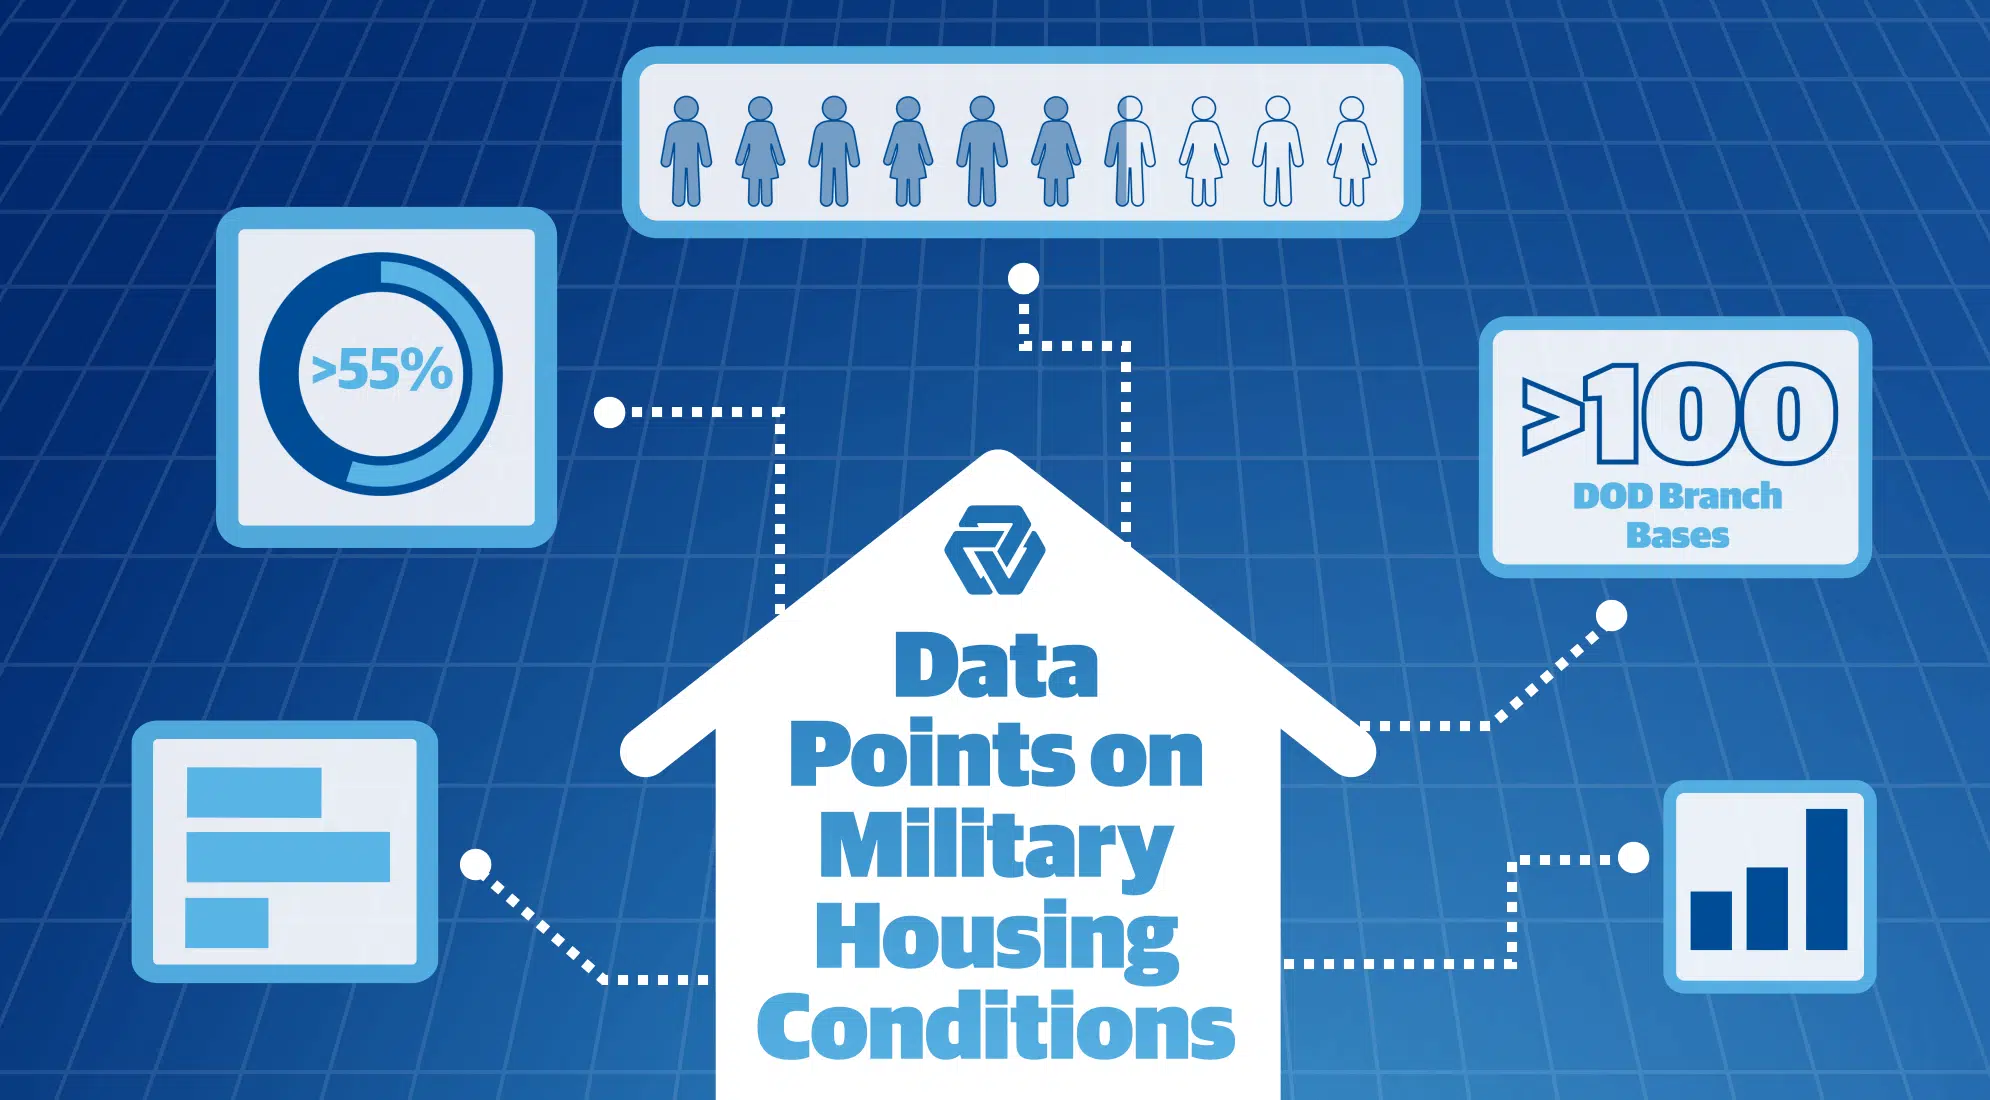 7 Data Points on Military Housing Conditions